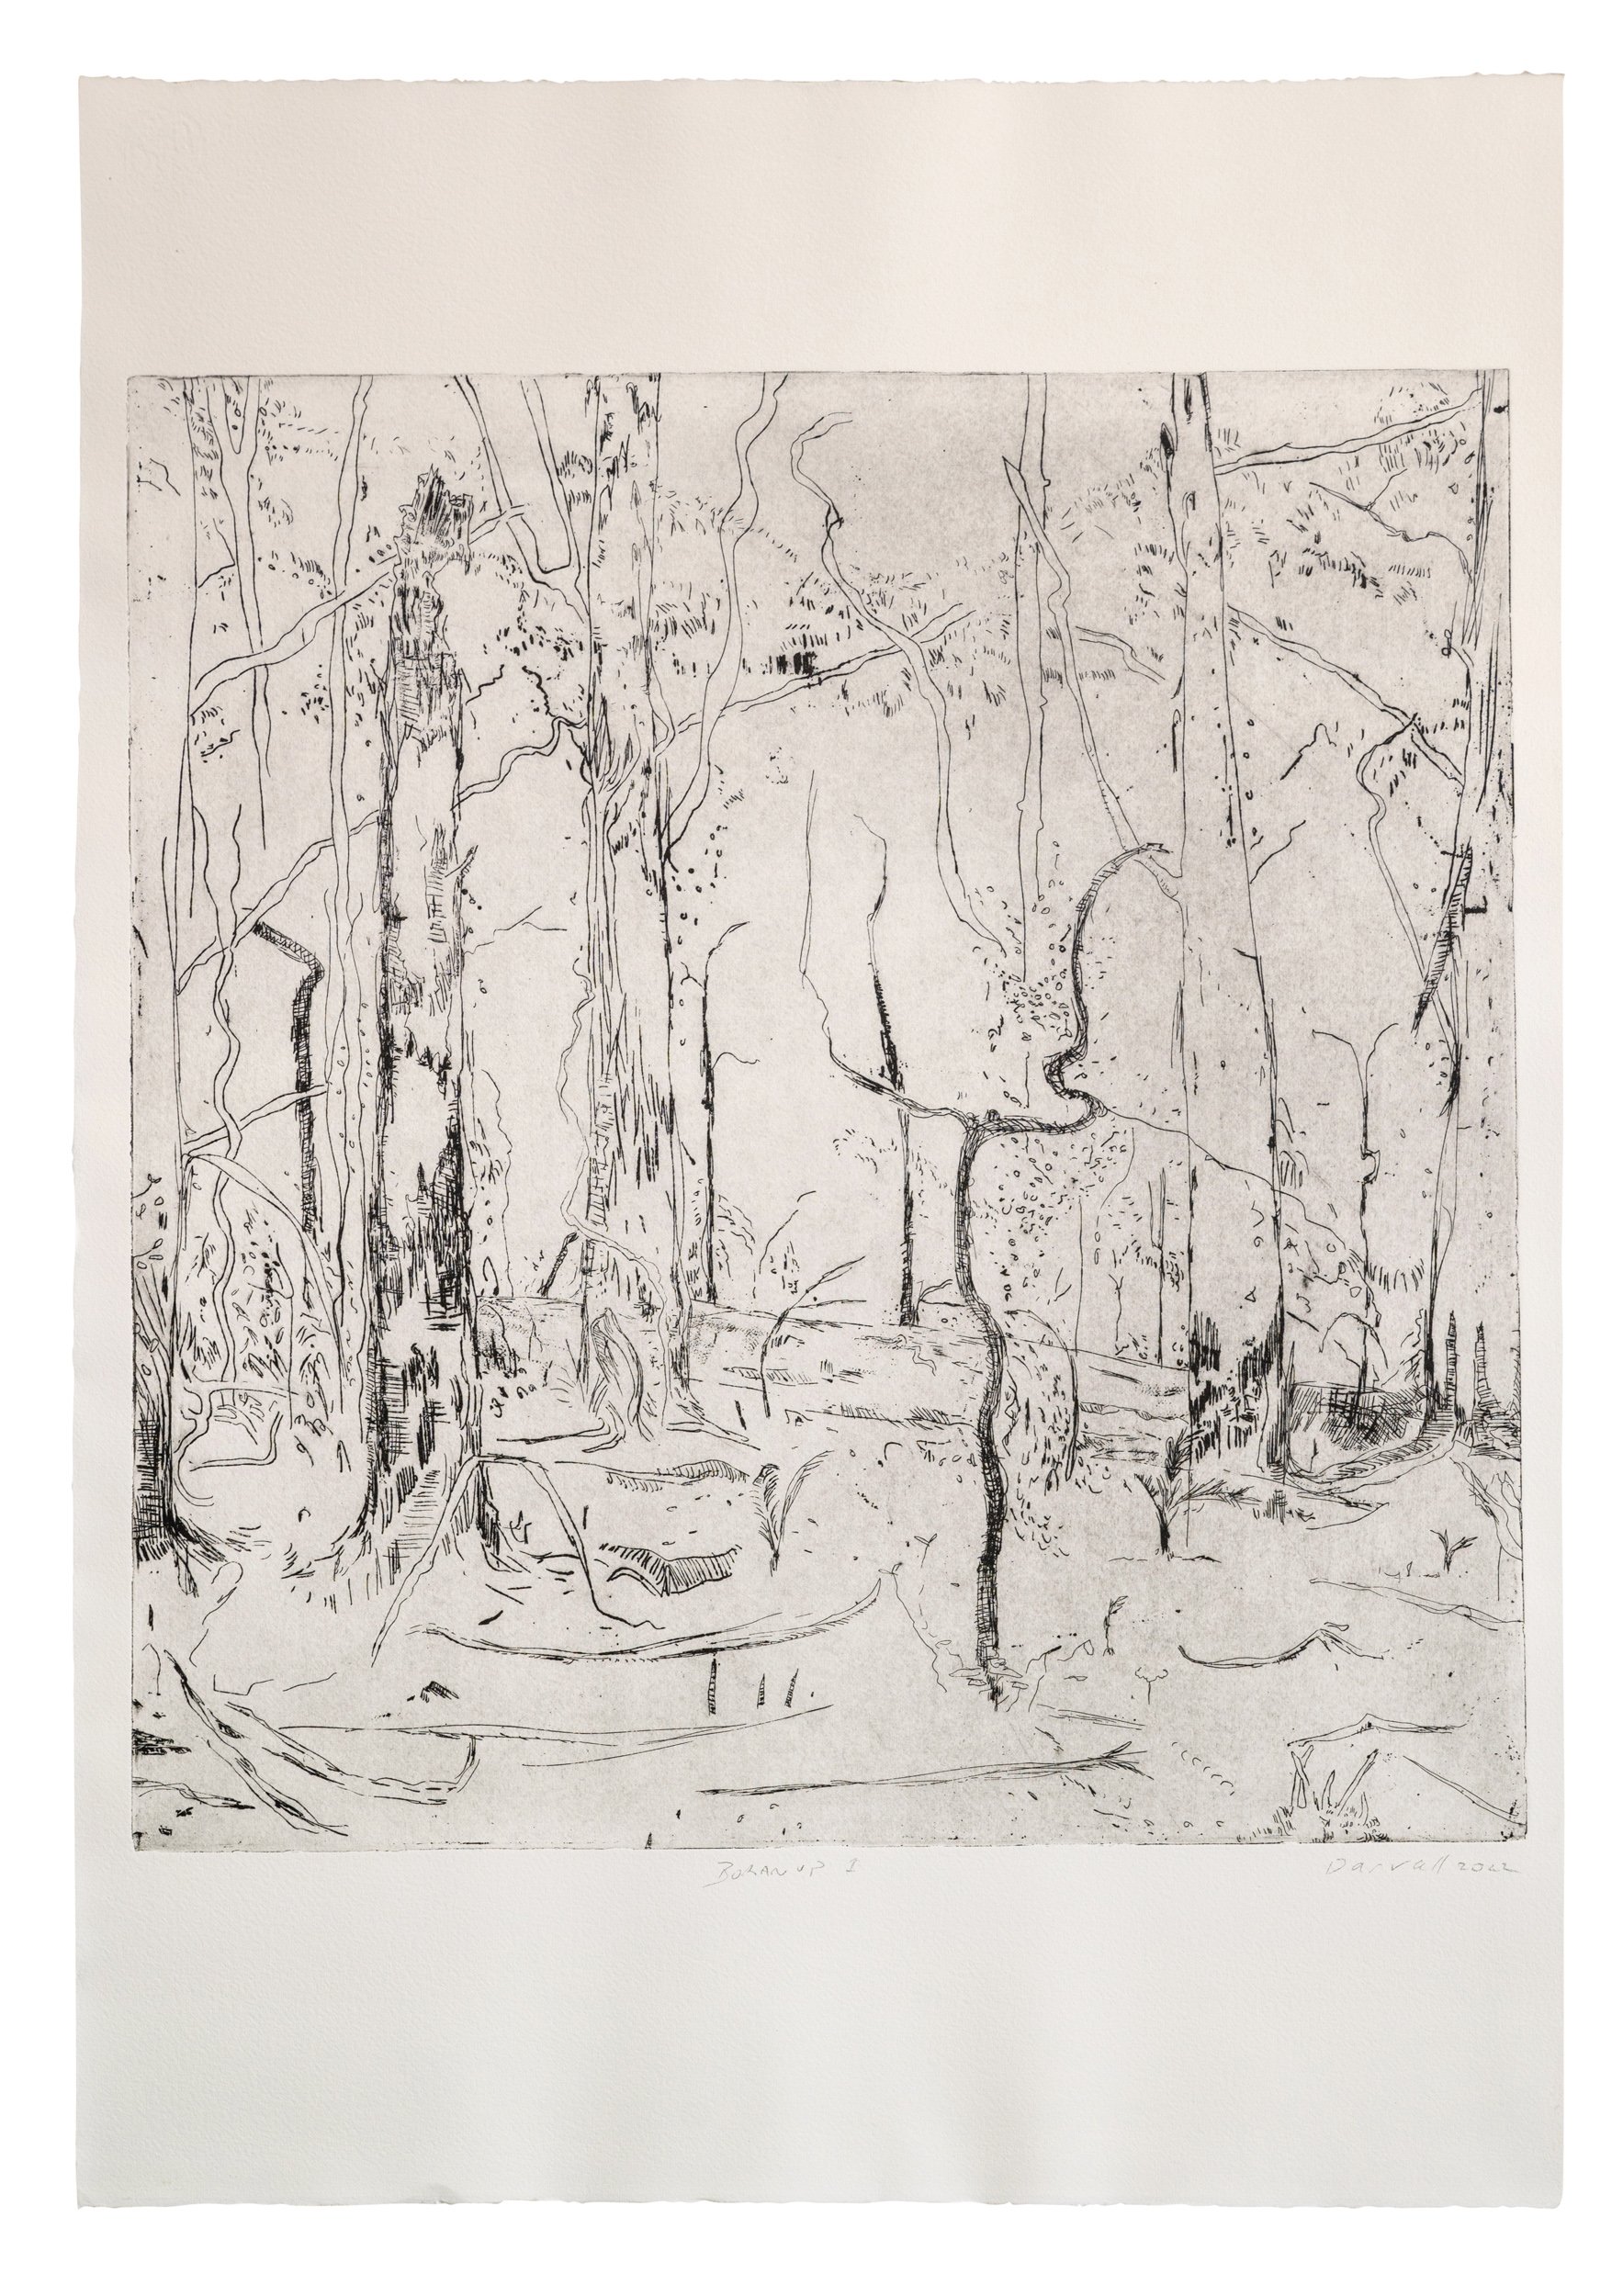  Boranup A, 2022, (No 1) 56 x 76 cm etching on  Hahneumle image size 45x50cm artist proof    edition of 20 